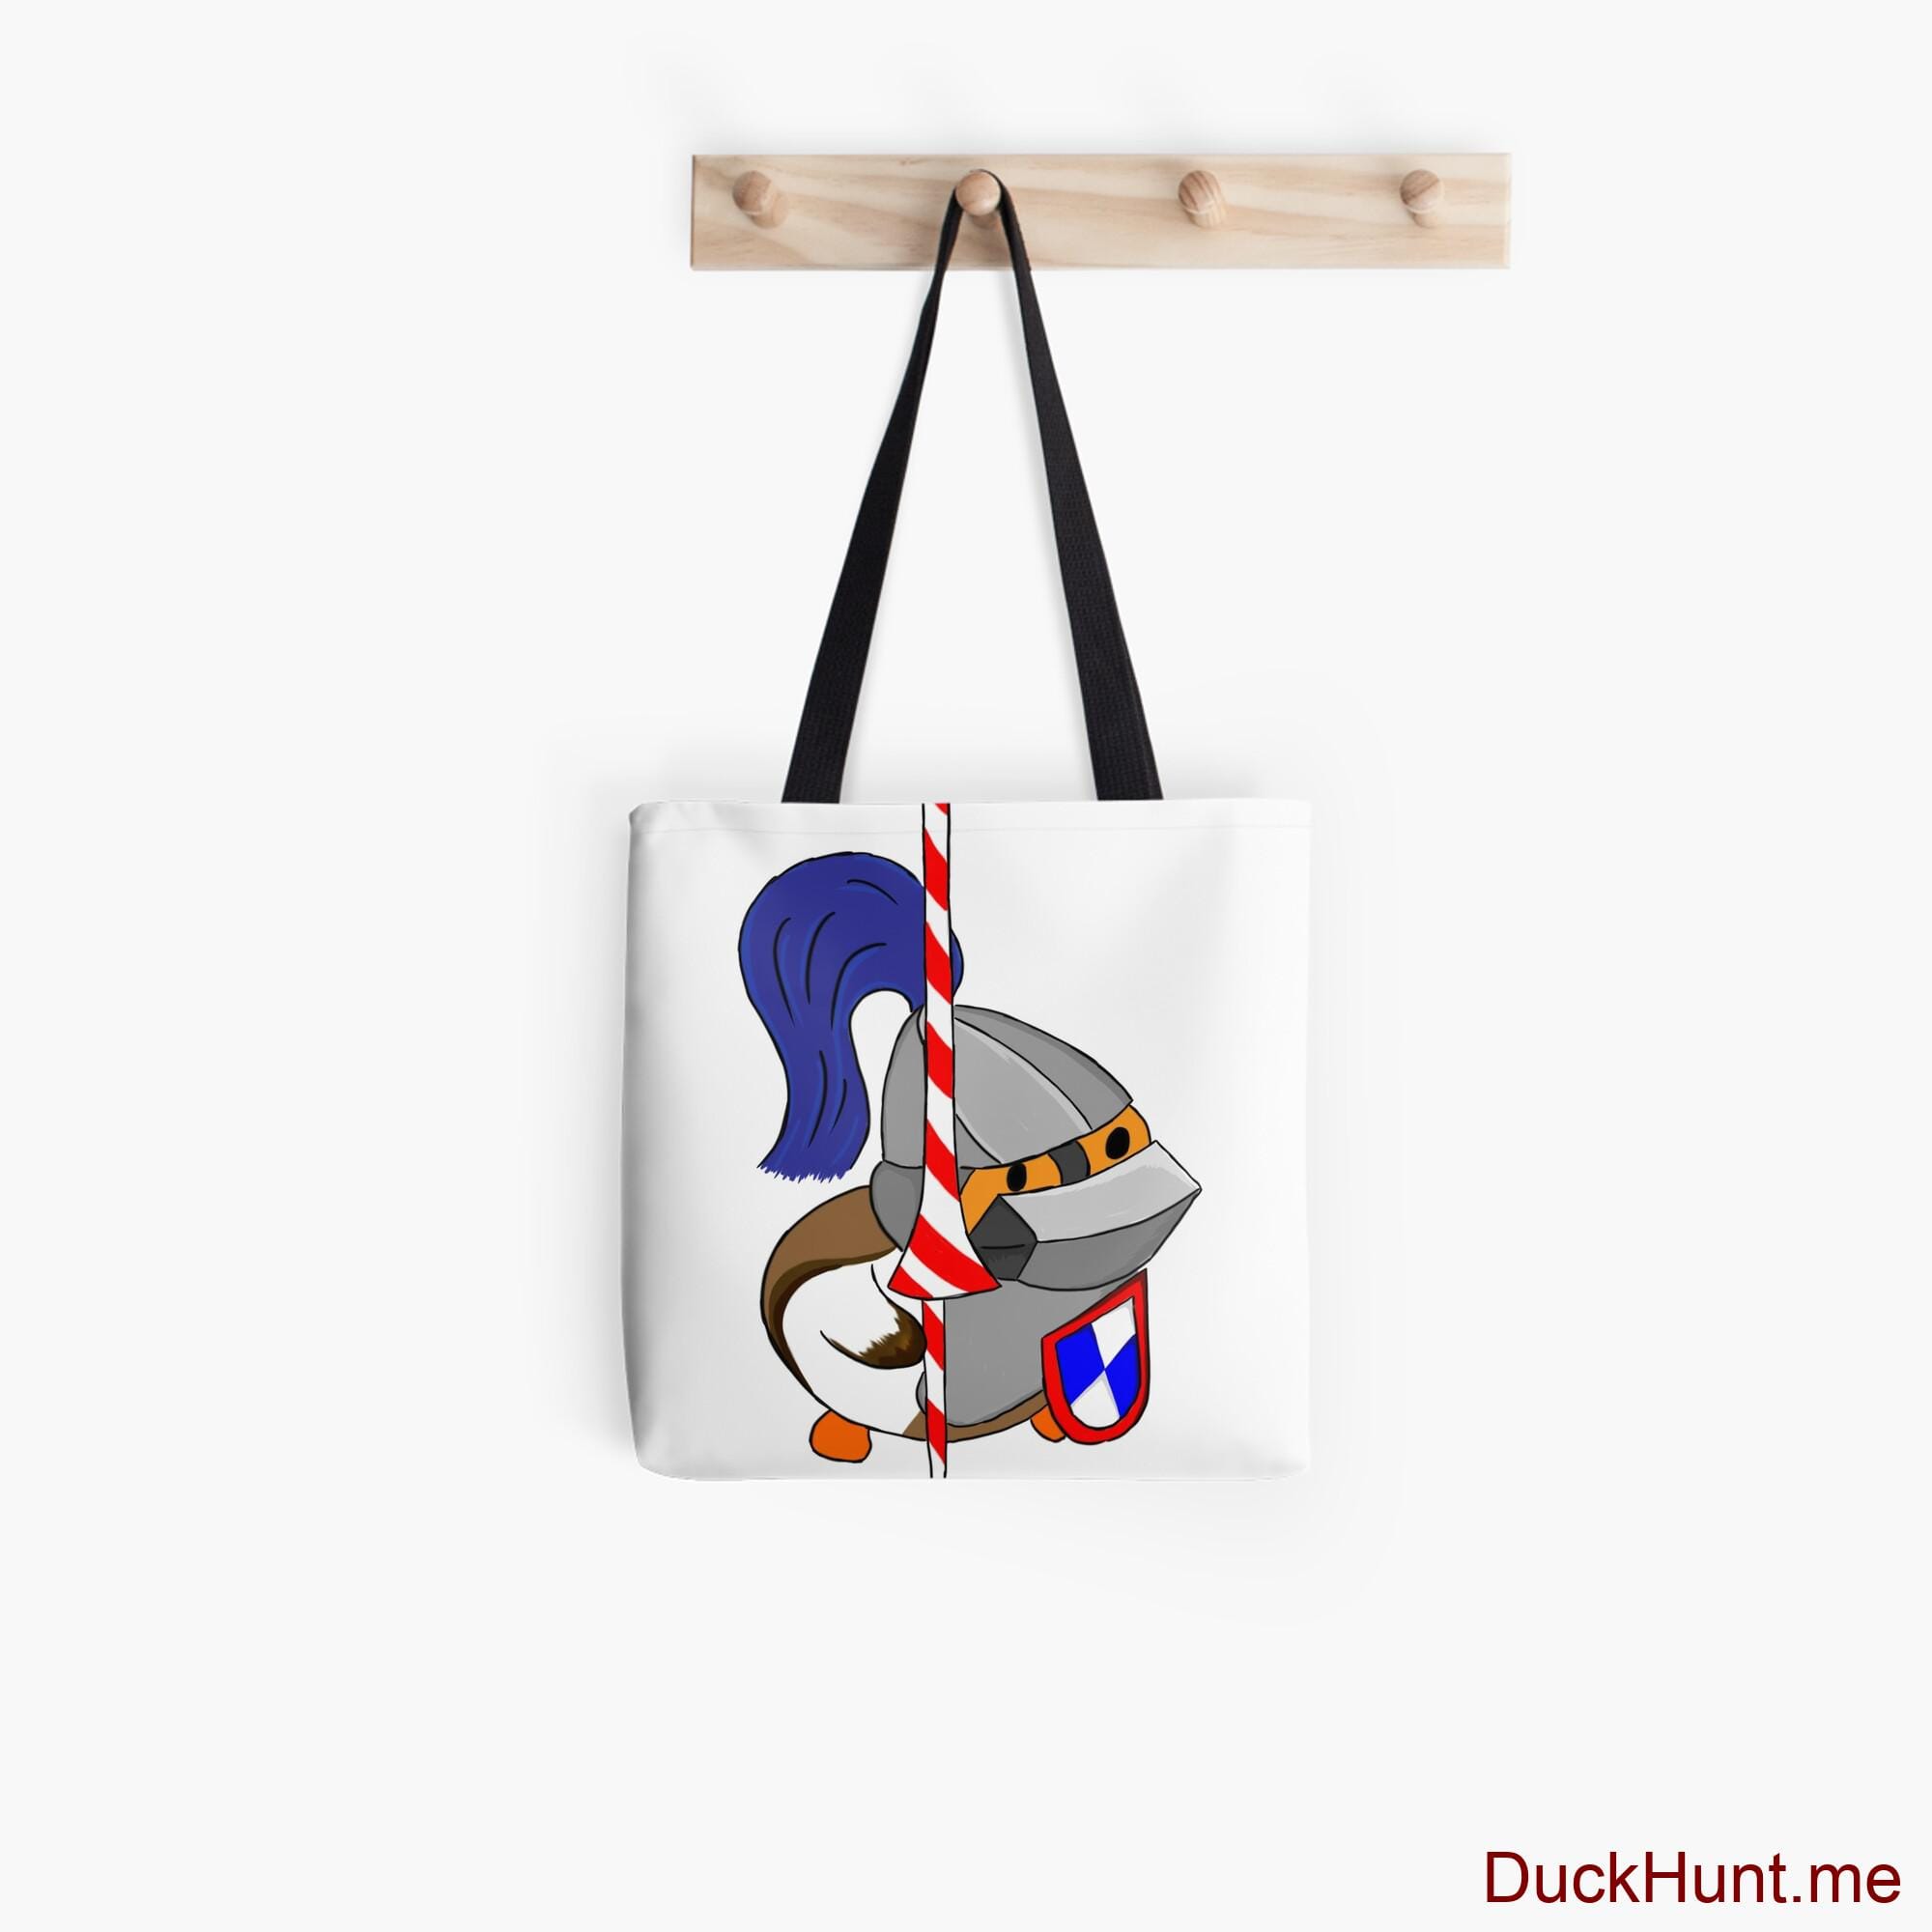 Armored Duck Tote Bag